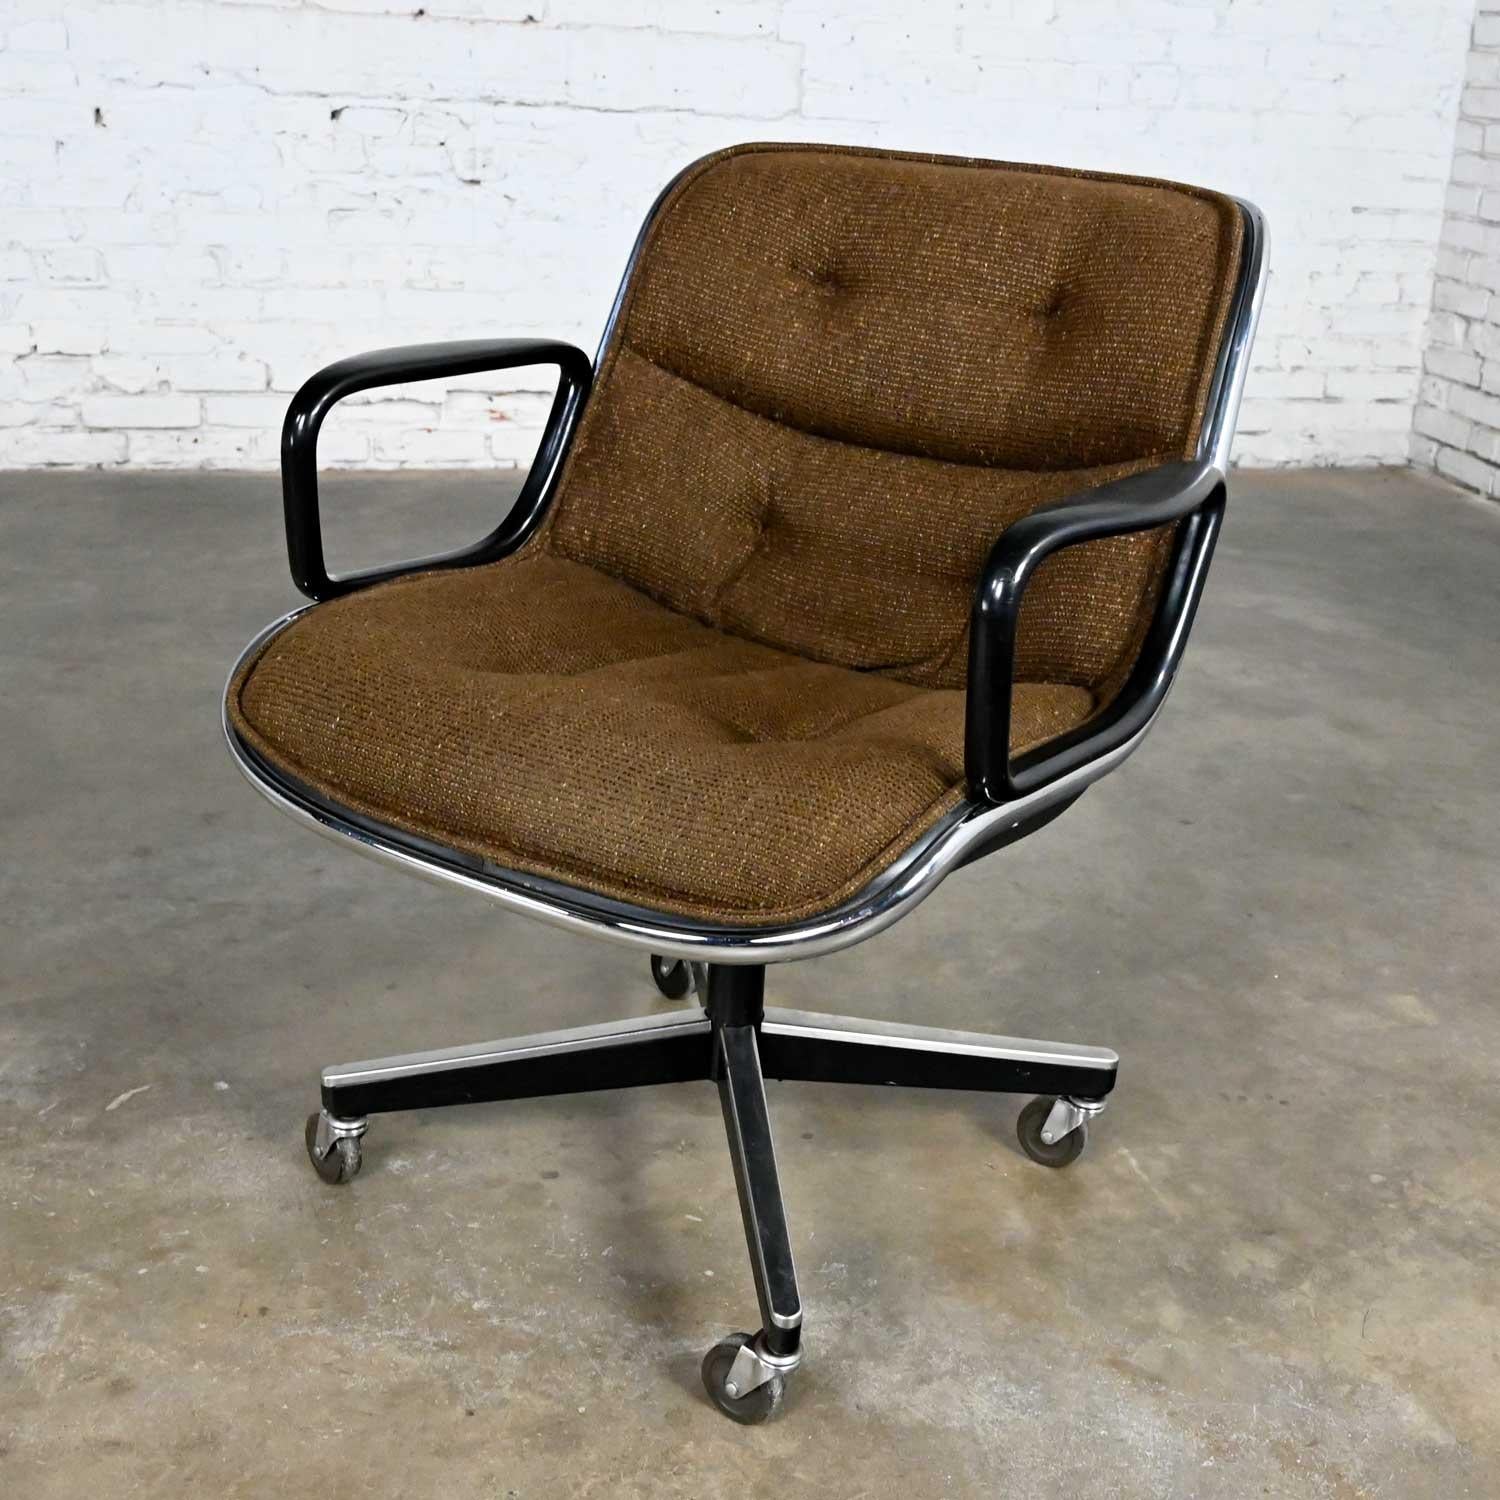 20th Century Charles Pollock Knoll Executive Armchair Brown Tweed 4 Prong Base with Casters